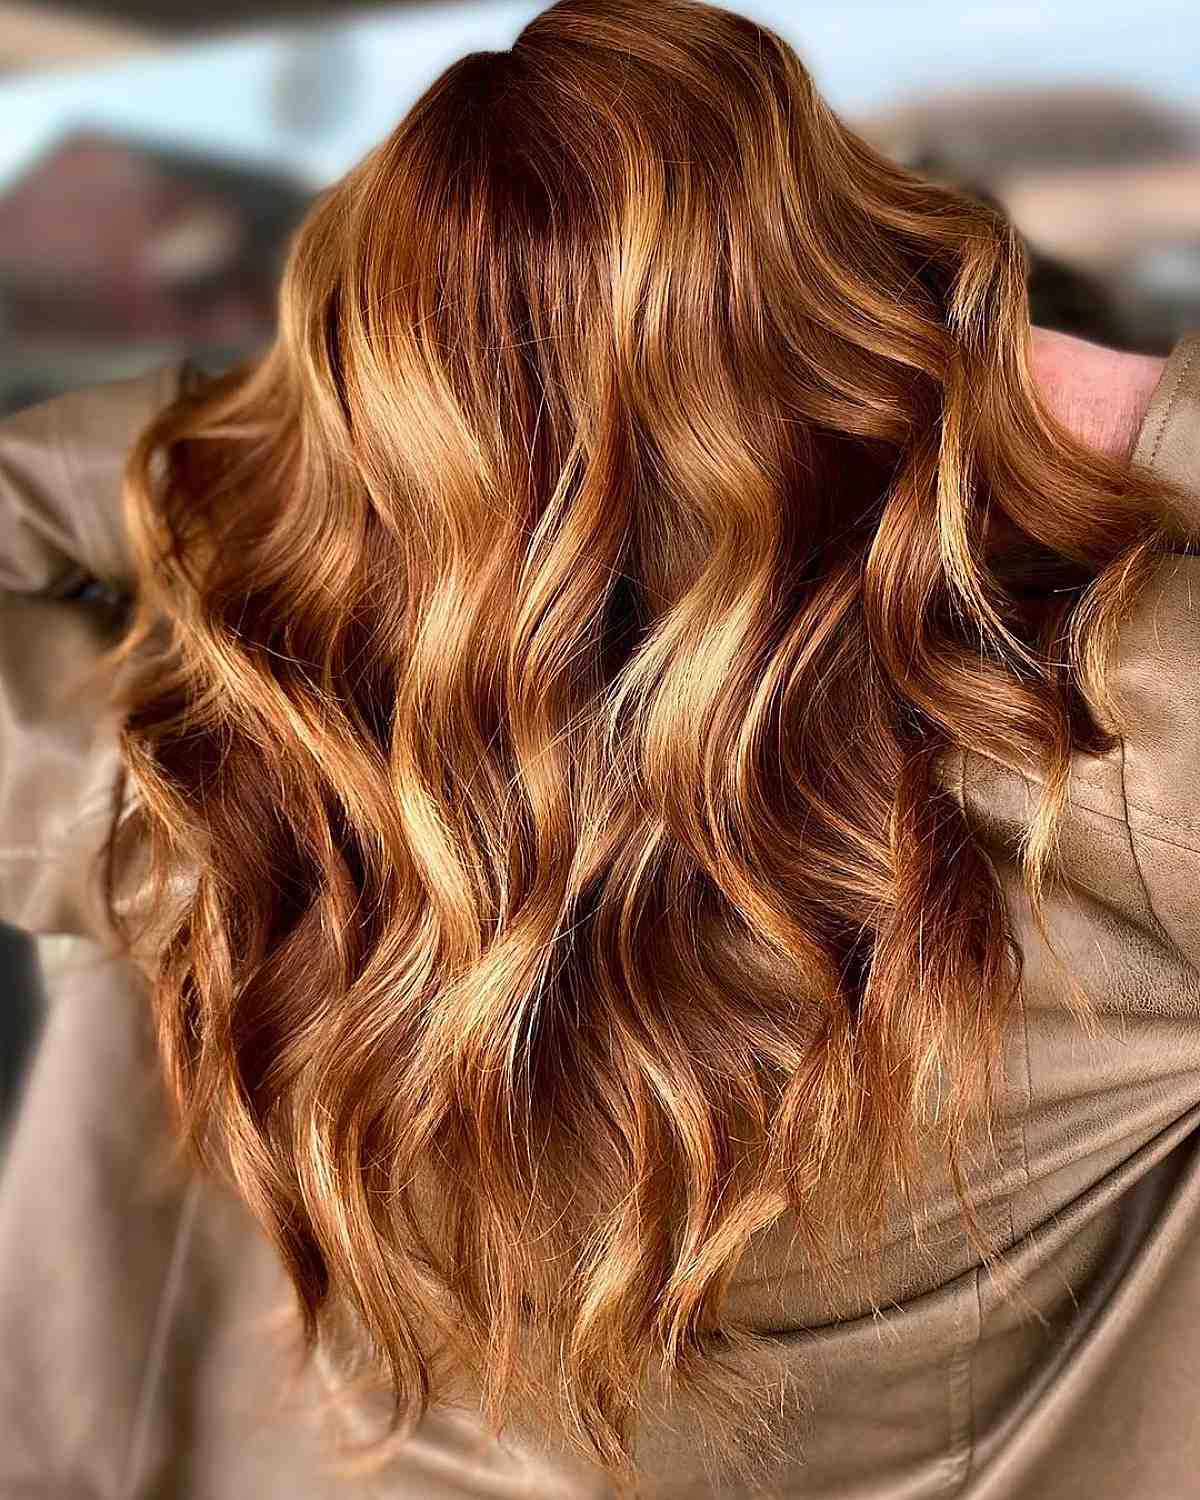 golden caramel color with long loose curls